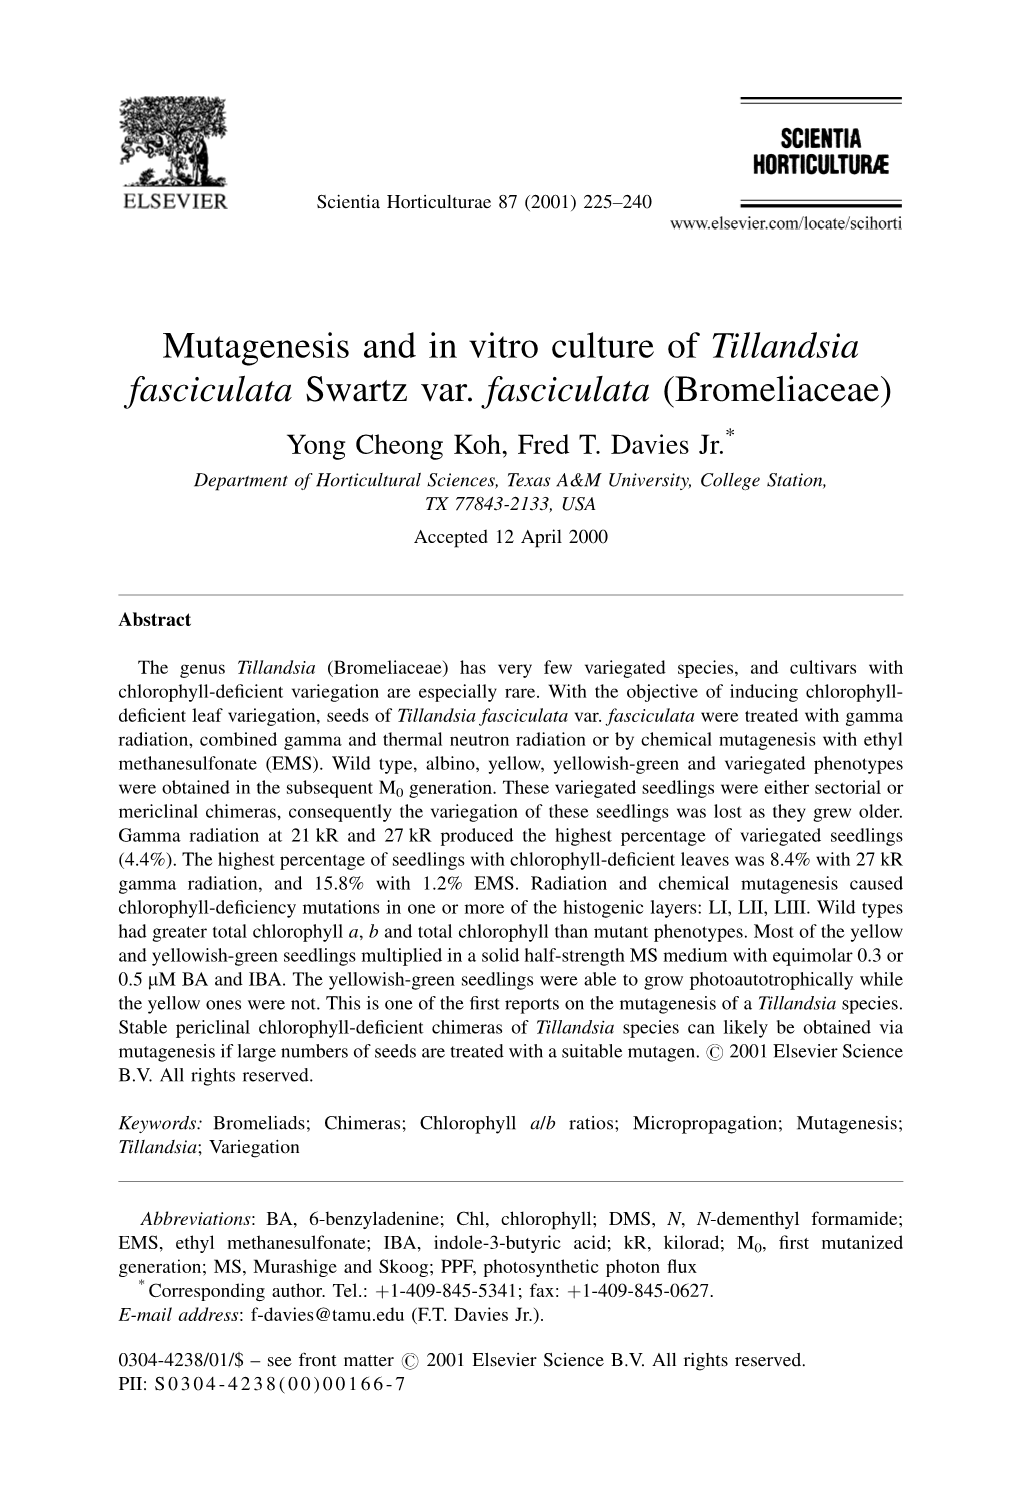 Mutagenesis and in Vitro Culture of Tillandsia Fasciculata Swartz Var. Fasciculata (Bromeliaceae) Yong Cheong Koh, Fred T